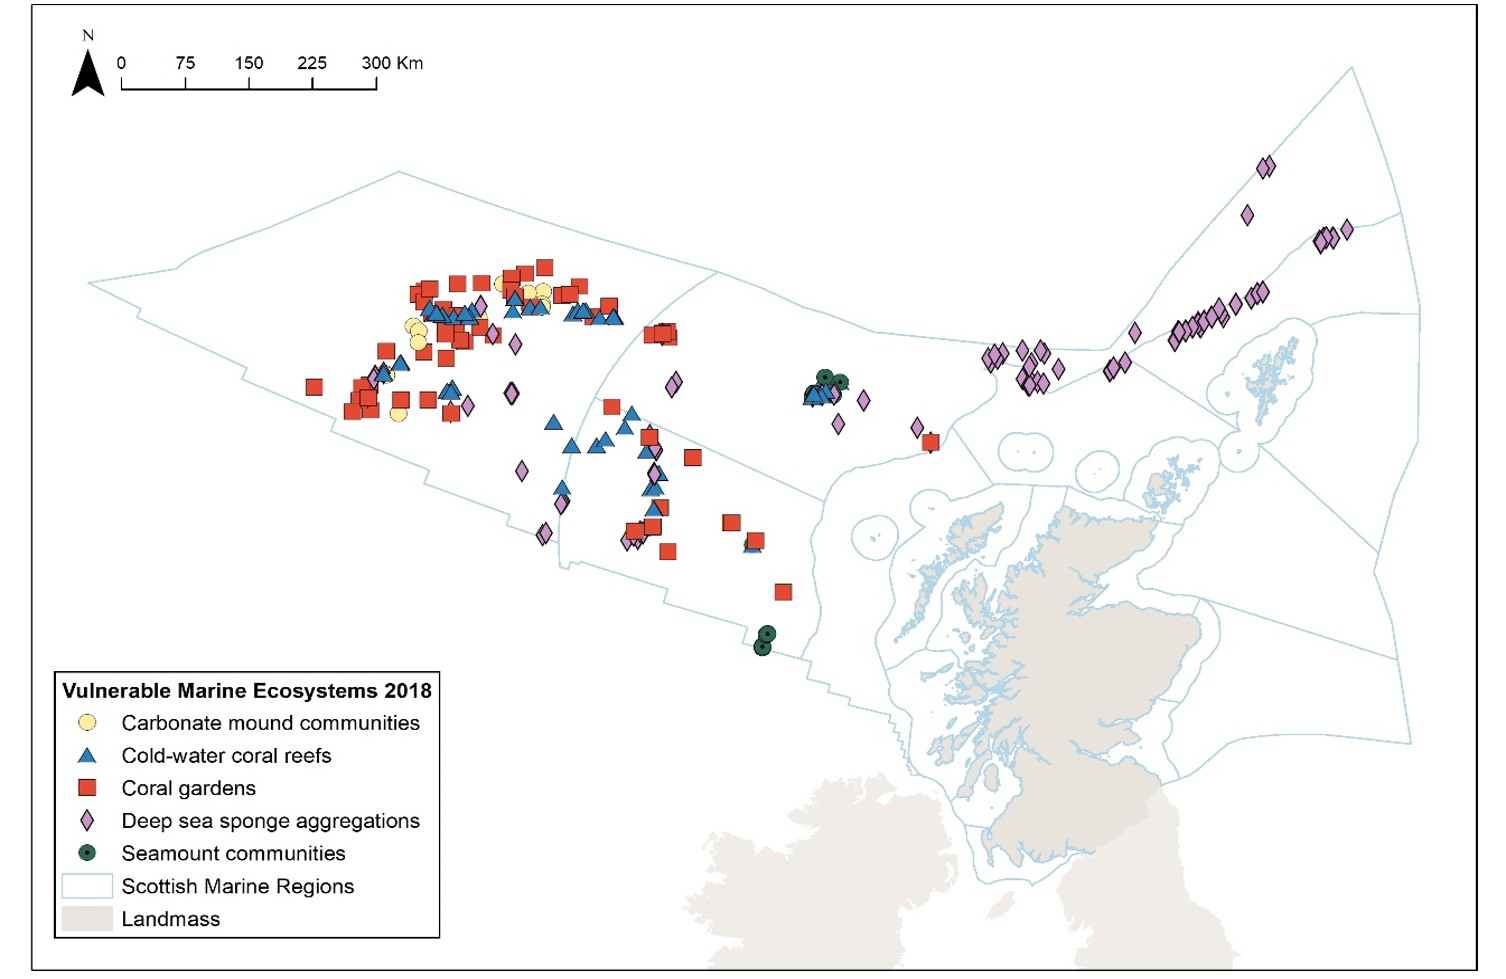 Figure 8. The known extent and distribution of Vulnerable Marine Ecosystems across the deep-waters around Scotland as of 2018 (GeMS: 2018). 